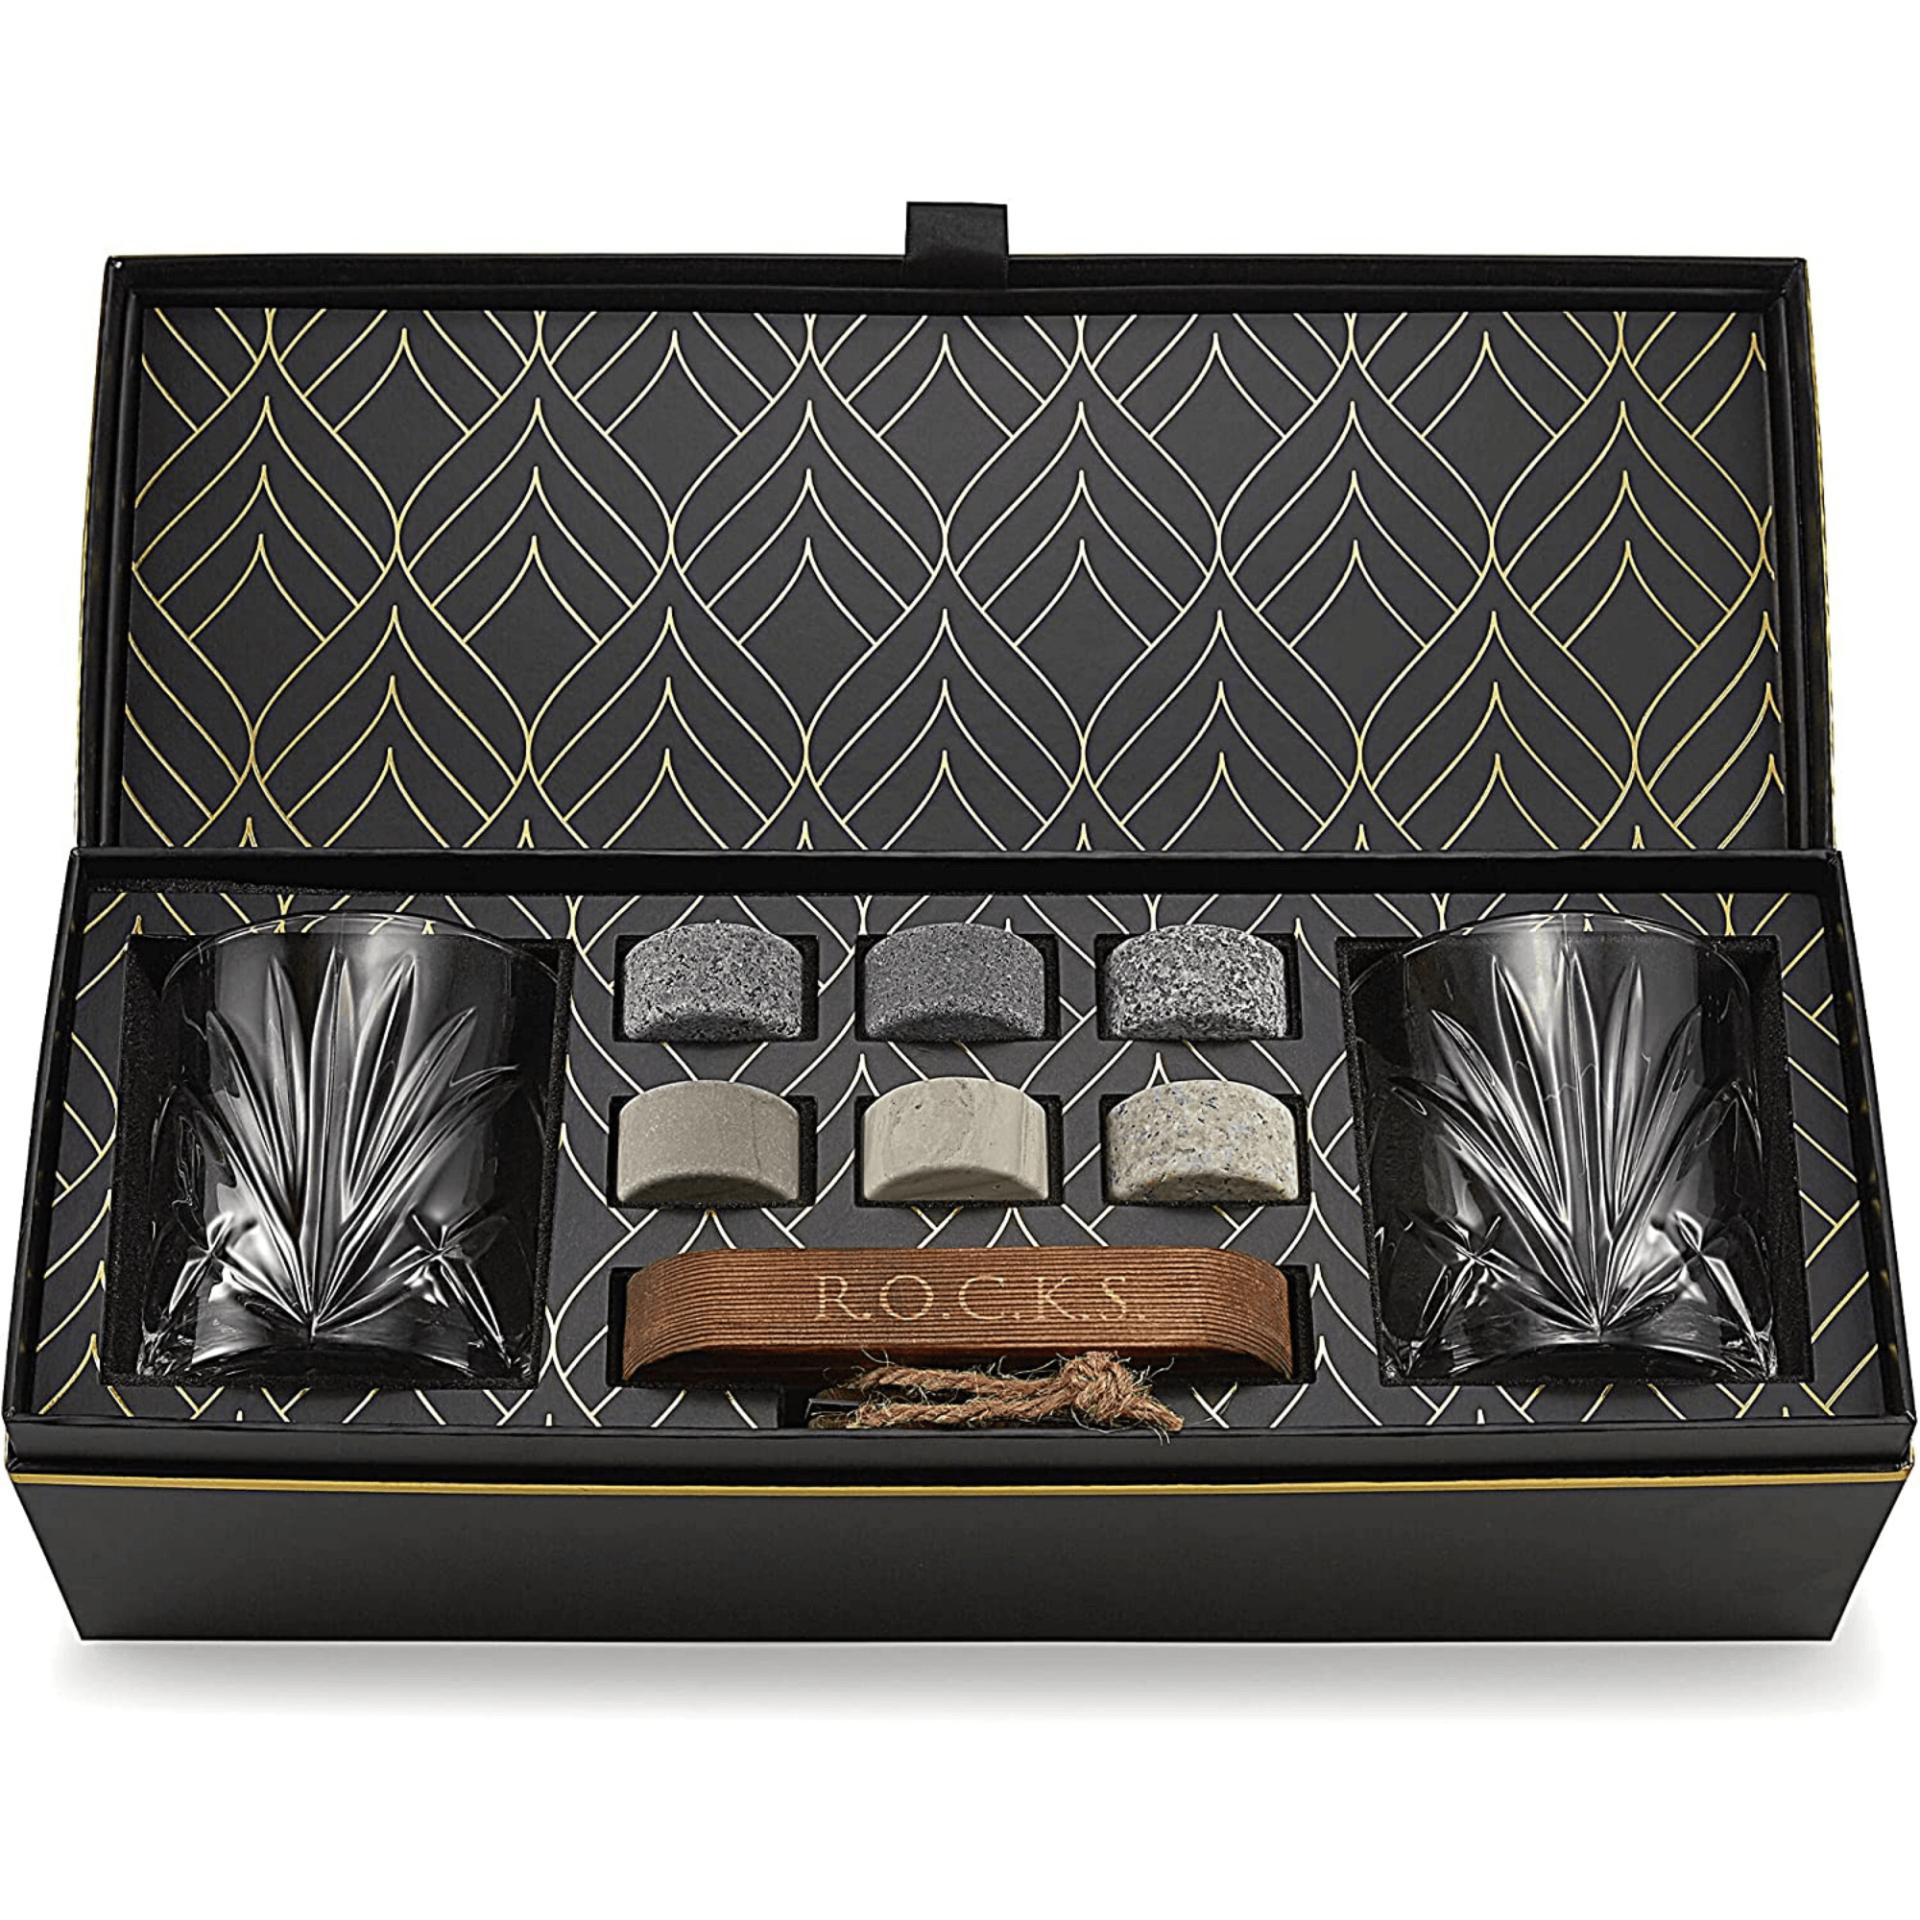 Featured in this image is the whiskey chilling stones gift set, with 2 crystal glasses